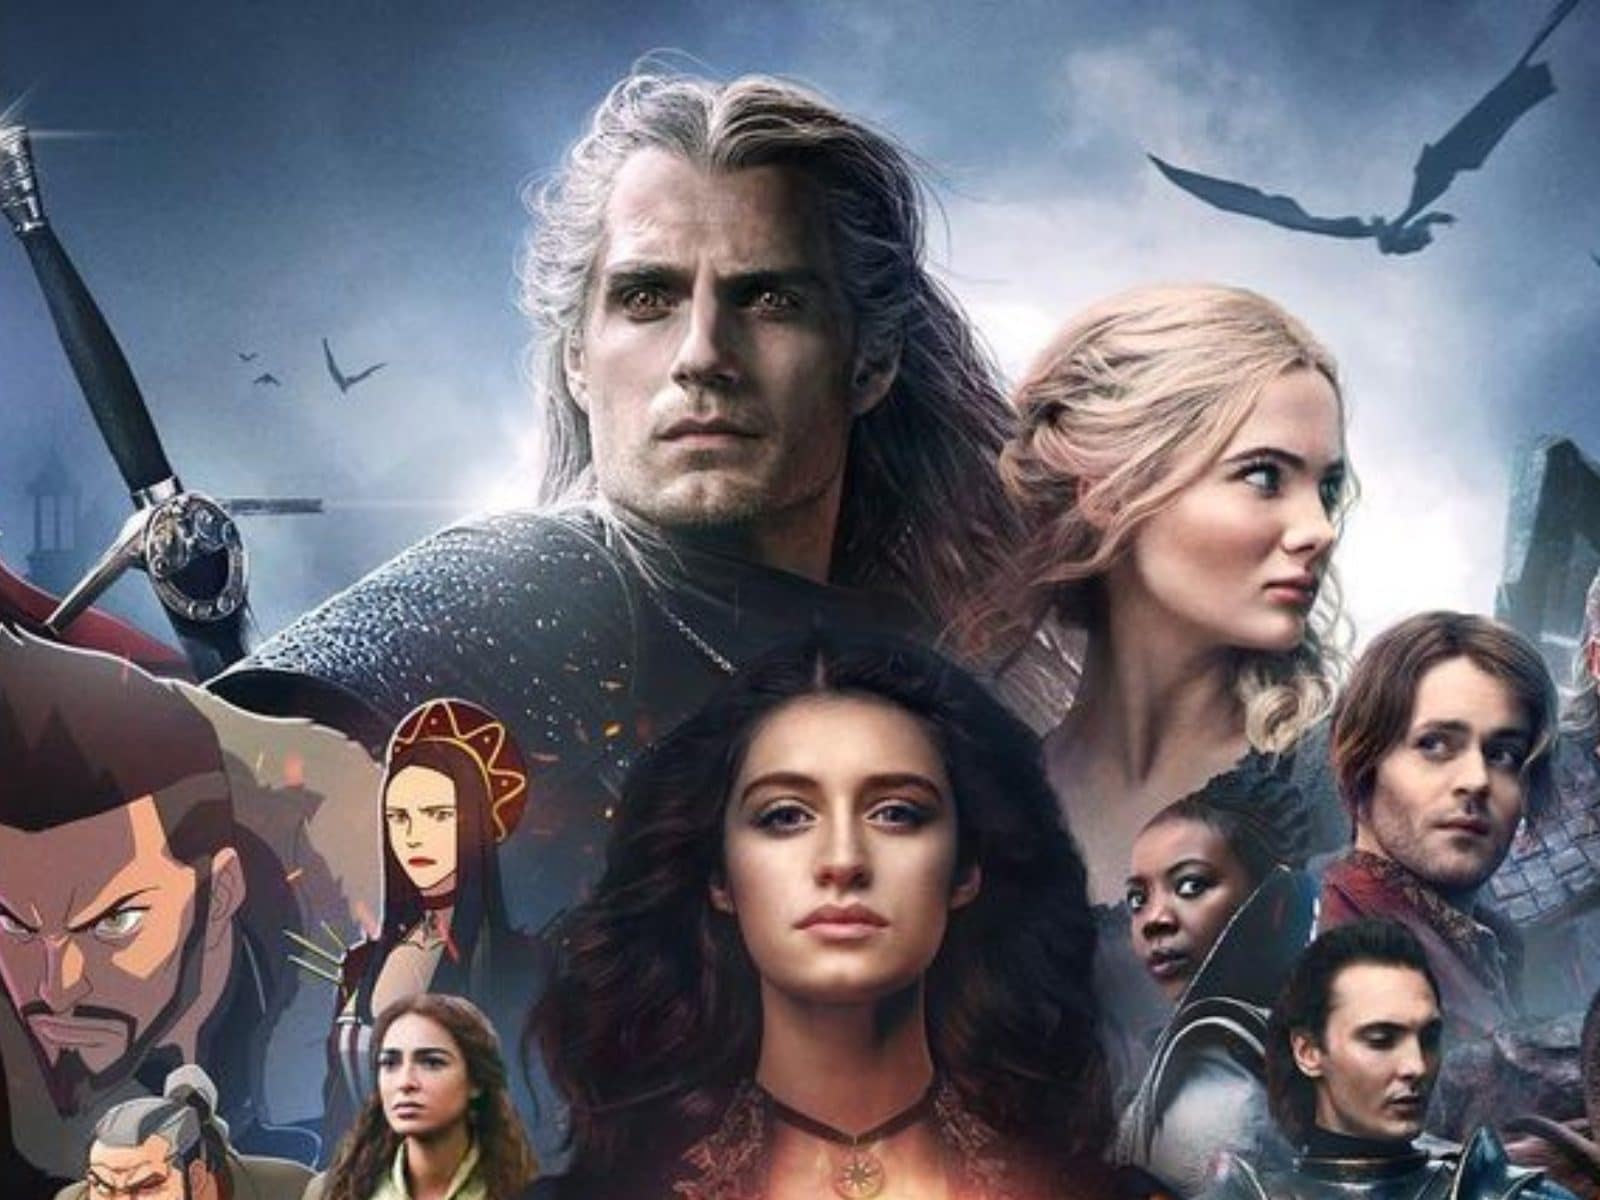 Netflix confirms there will be a third season of The Witcher - The Verge